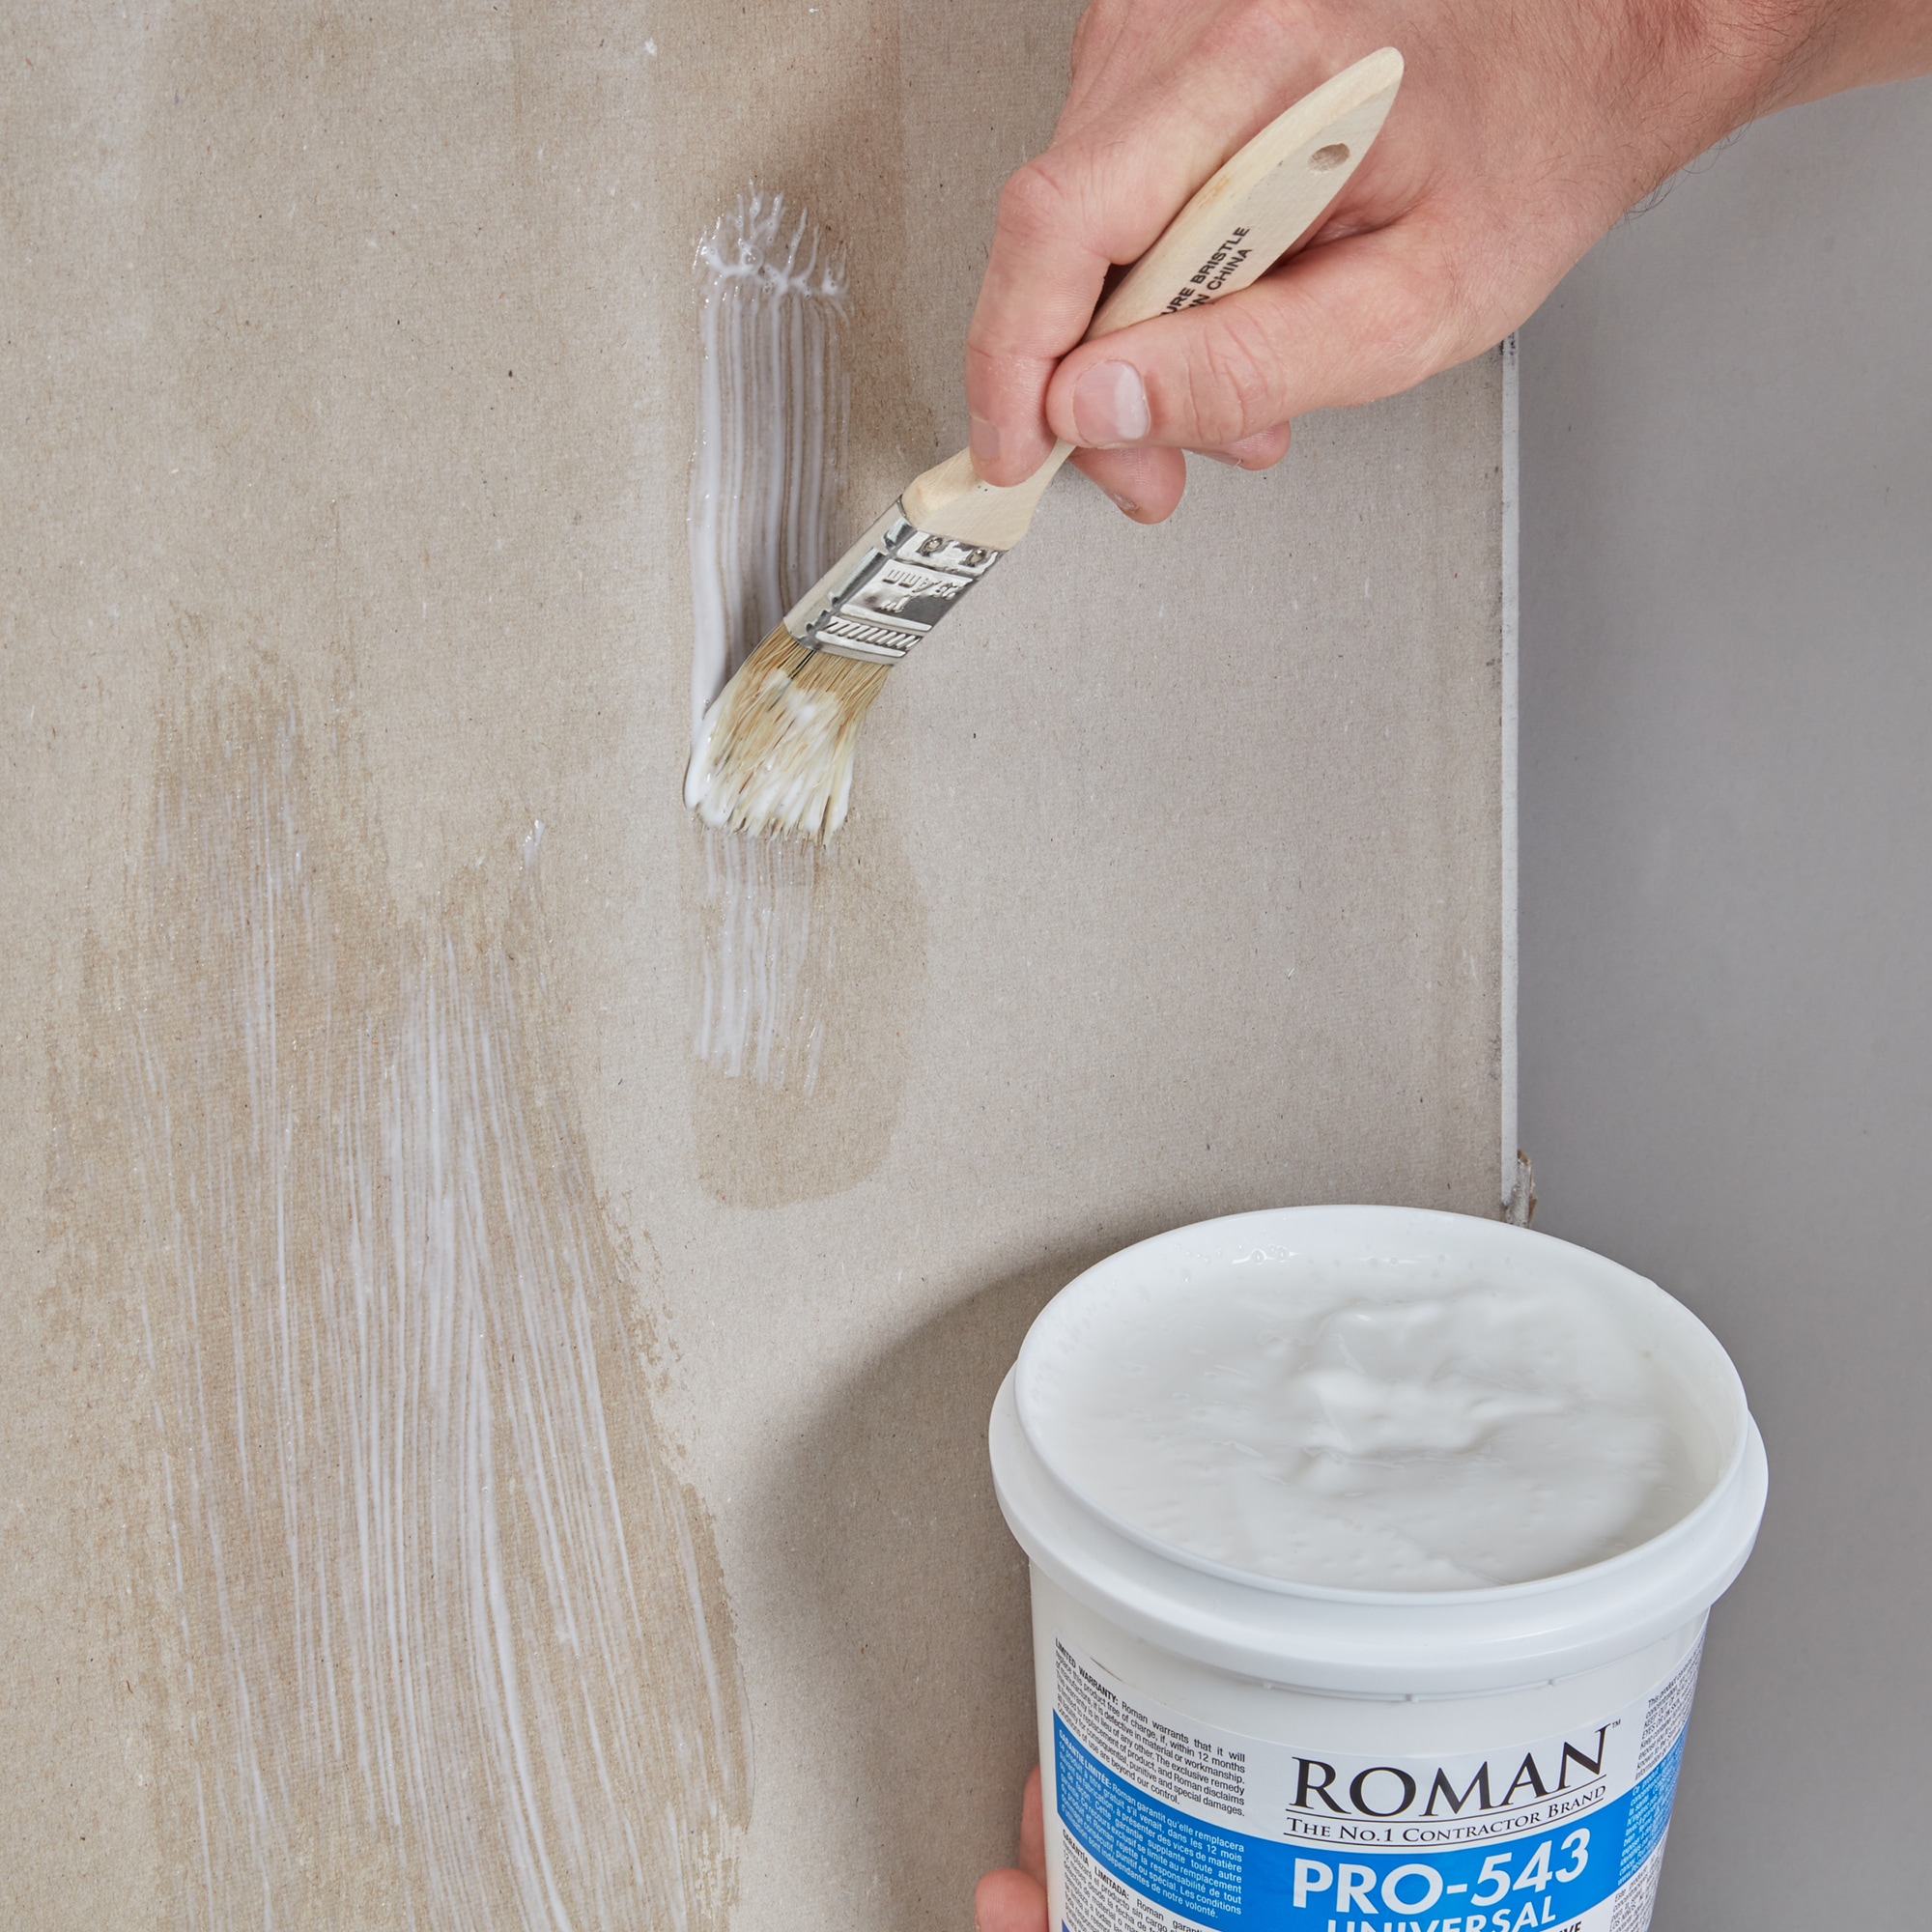 Roman 207811 Pro-543 Universal Wallpaper and Border Adhesive with Applicator, 1 Gal